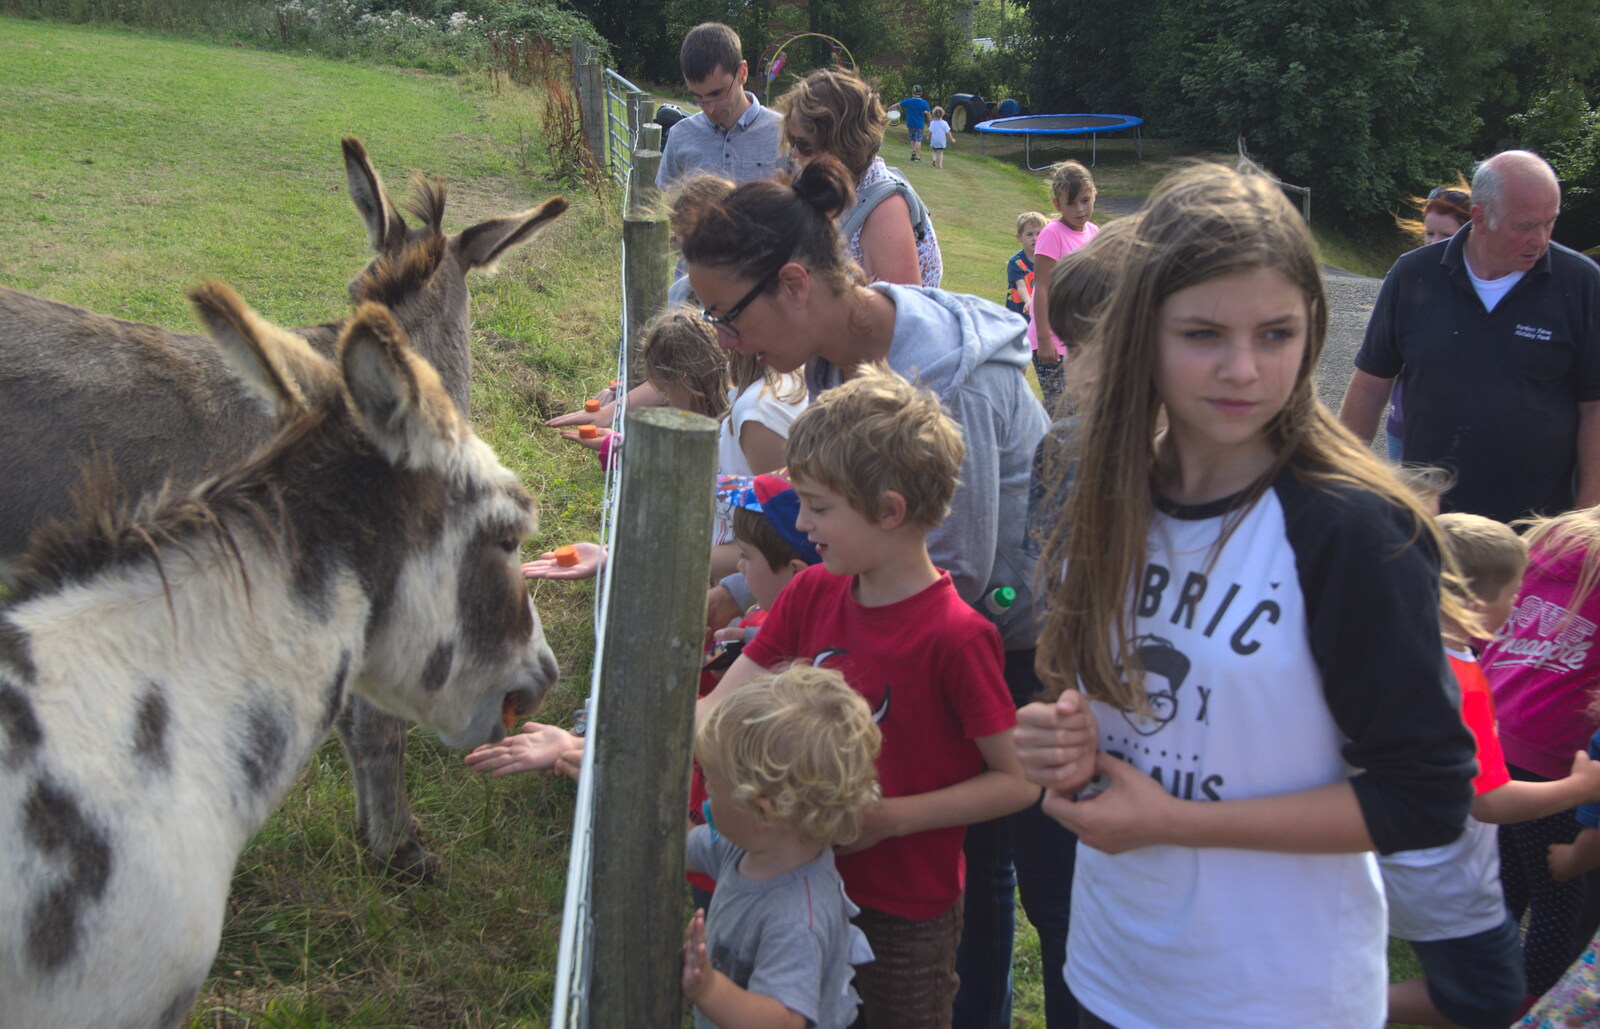 Fred feeds a donkey from Camping With Sean, Ashburton, Devon - 8th August 2016